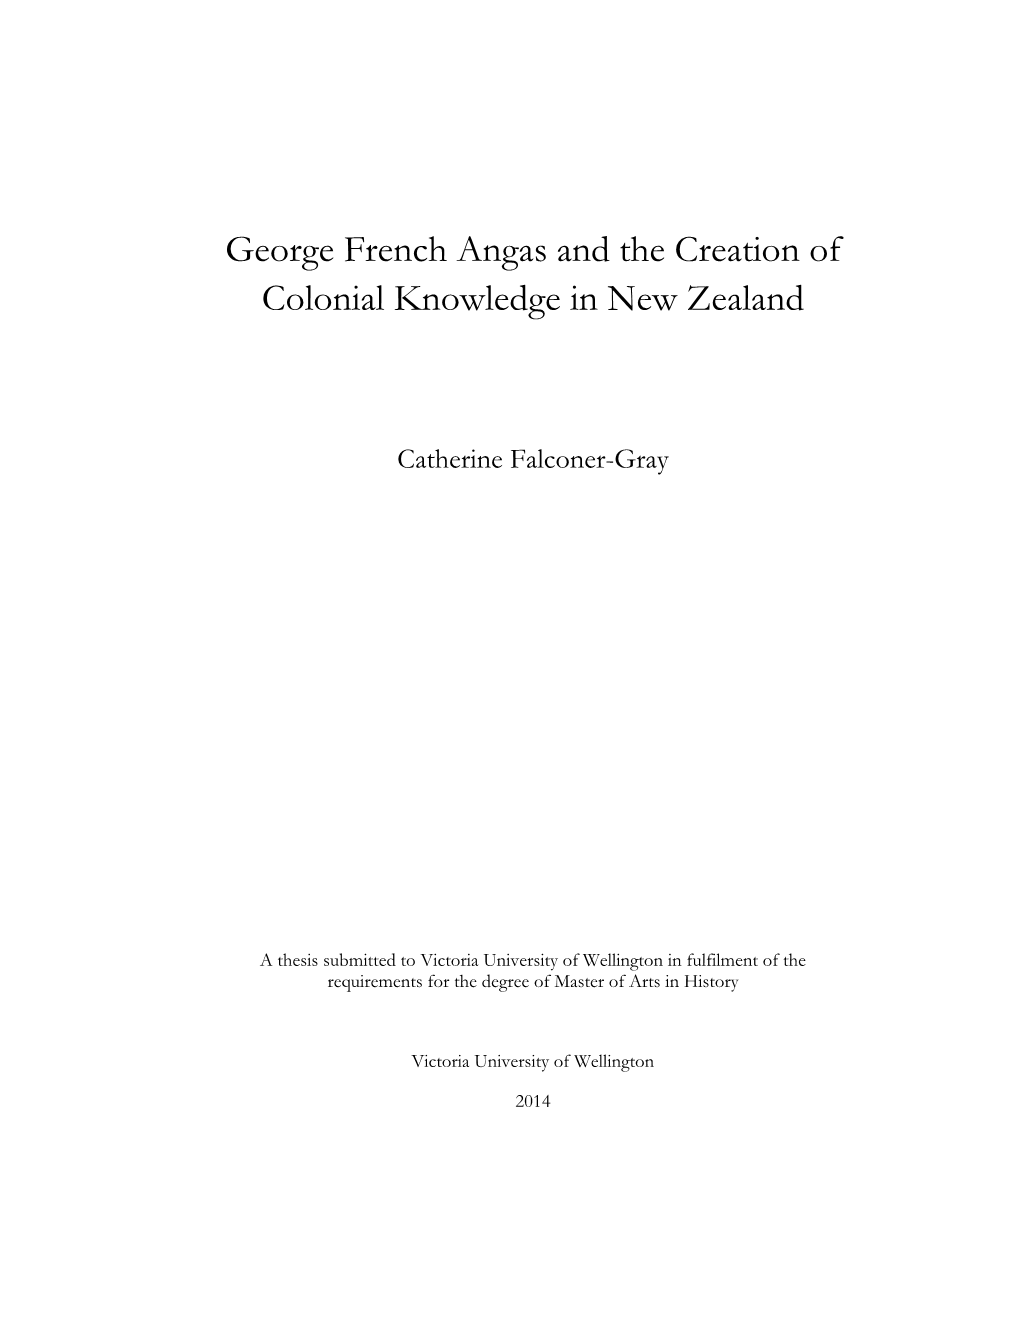 George French Angas and the Creation of Colonial Knowledge in New Zealand